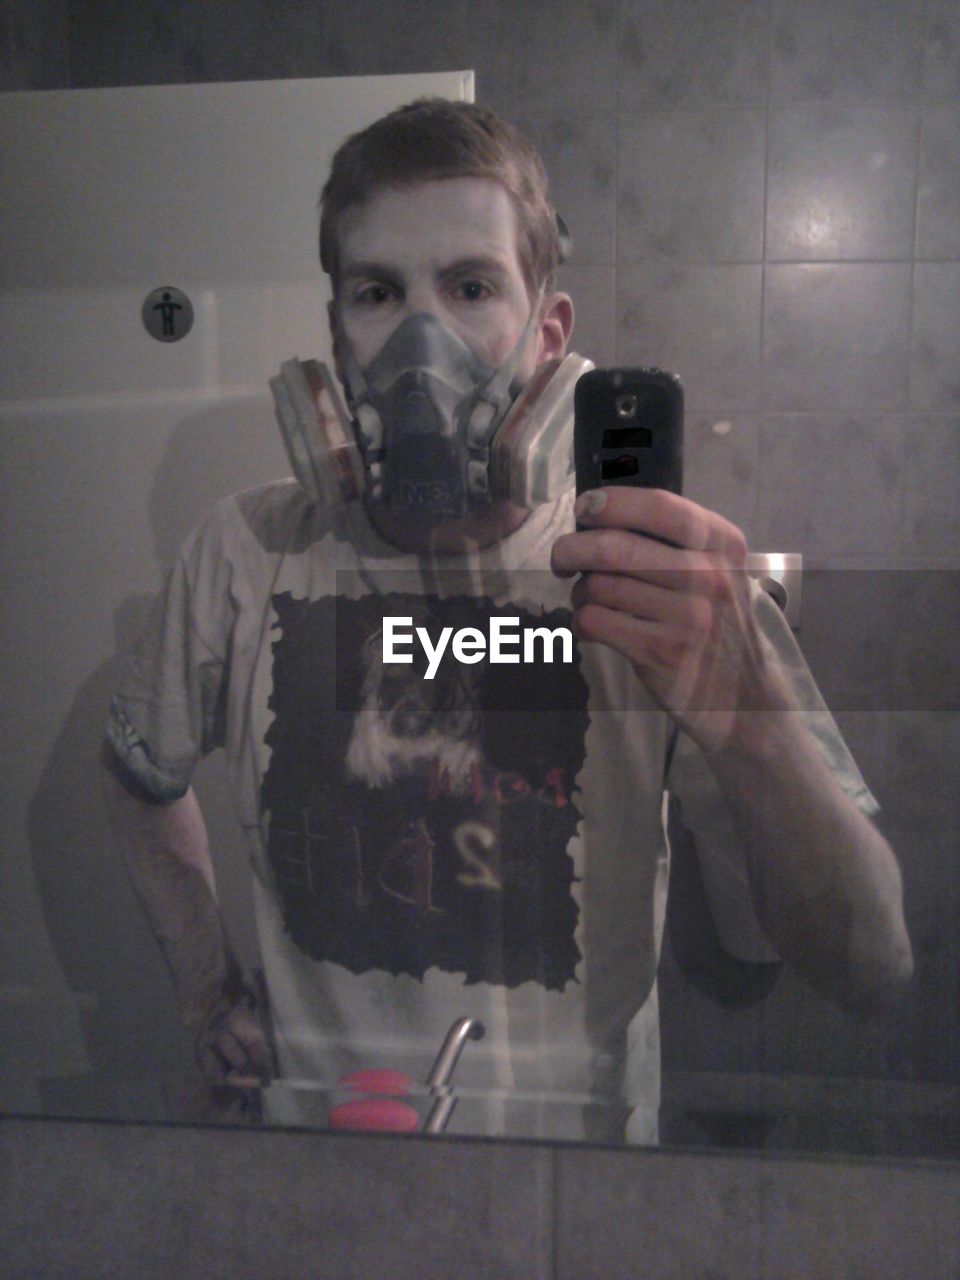 Reflection of man wearing gas mask on mirror while taking selfie in bathroom